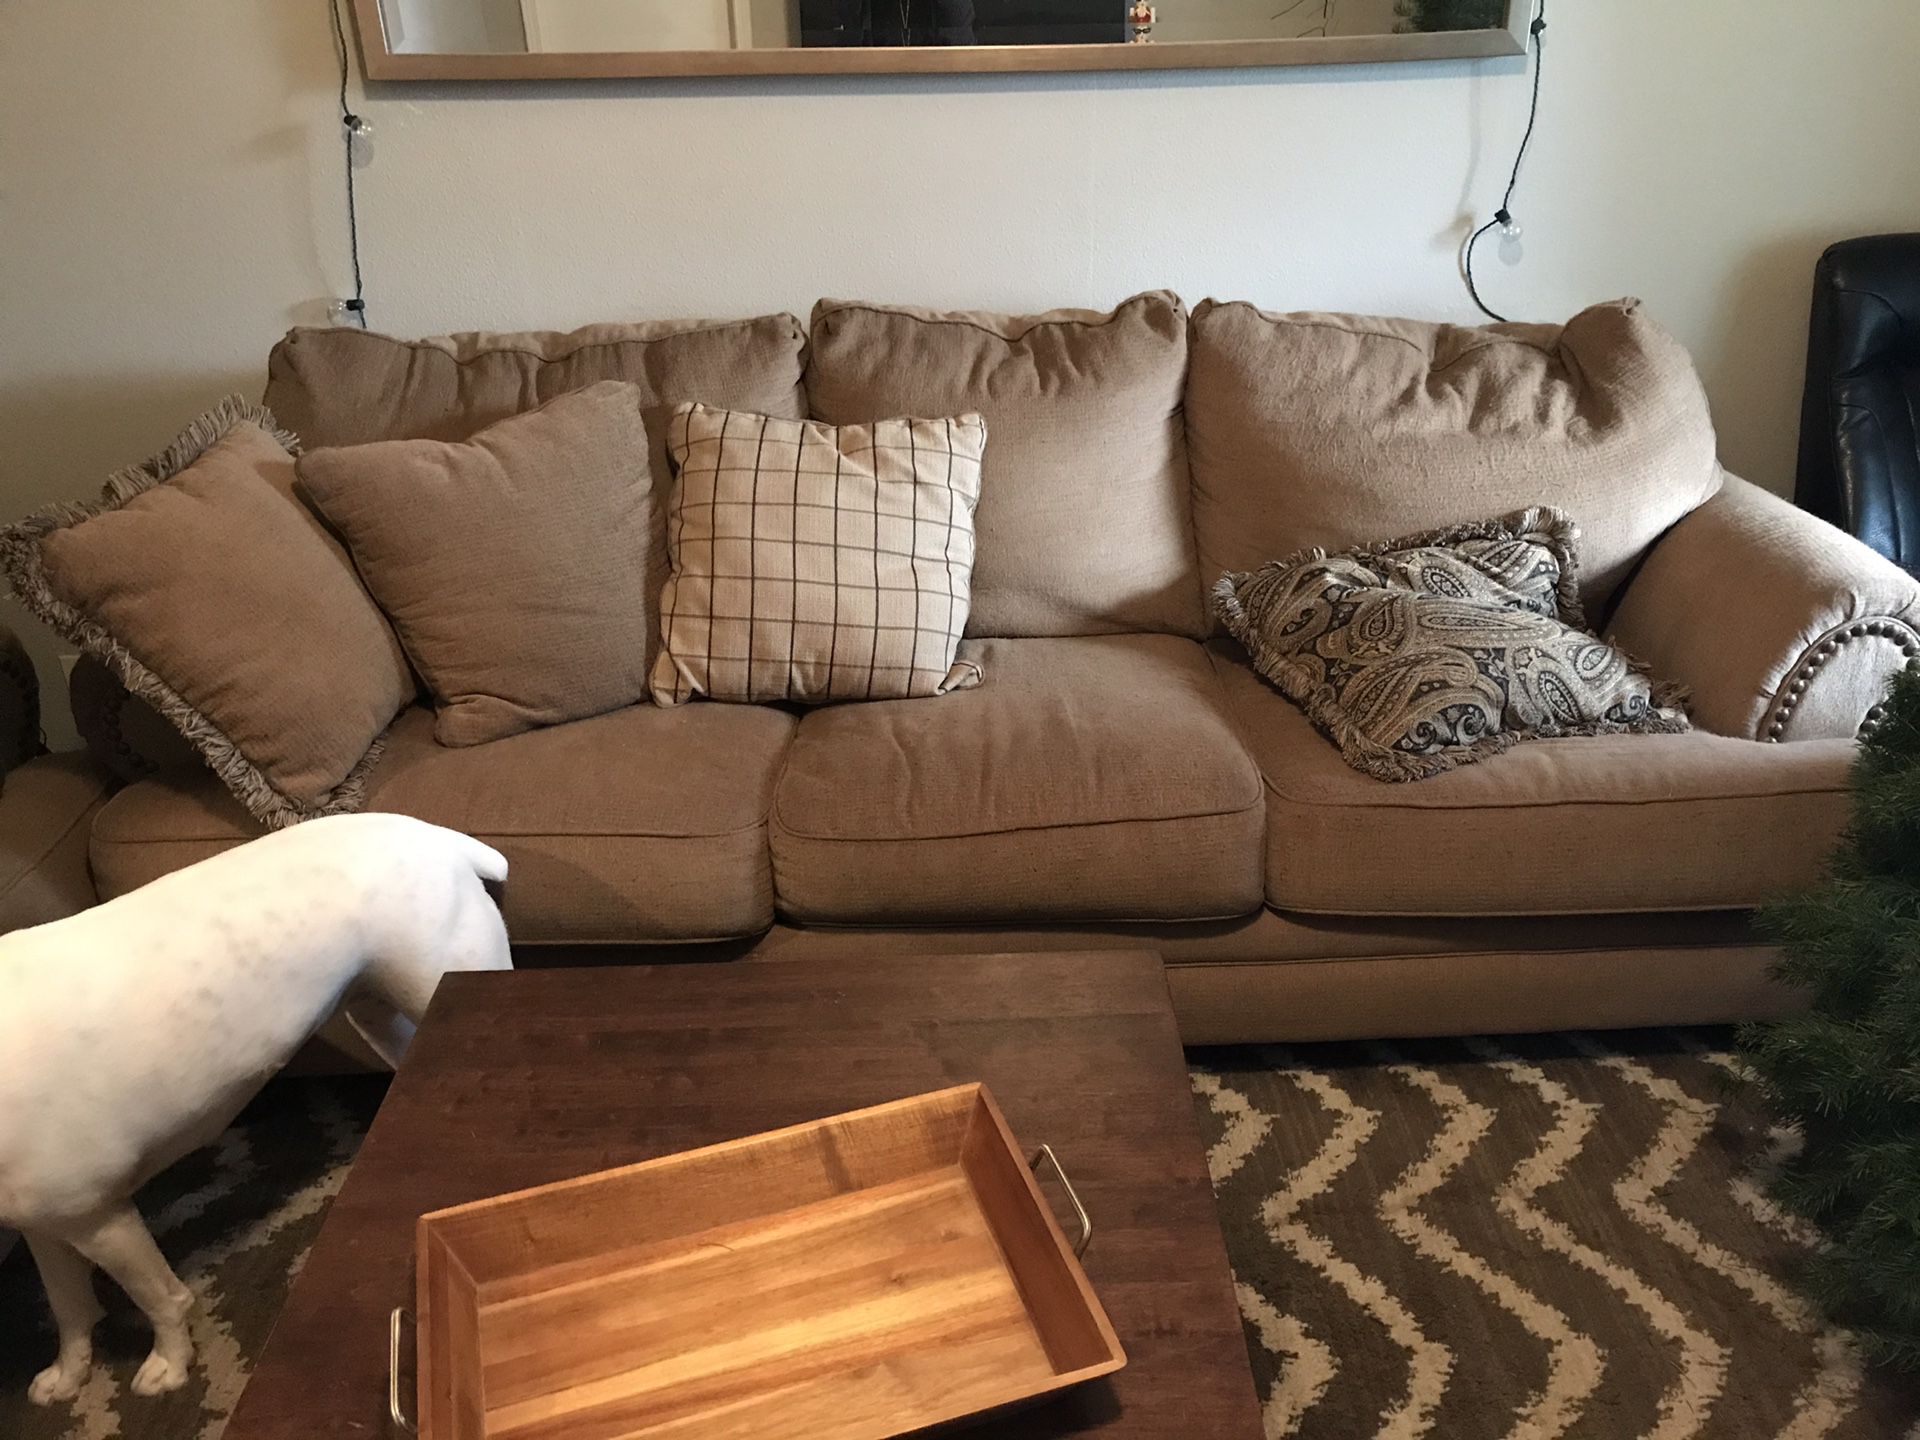 Free couch. Need gone ASAP.